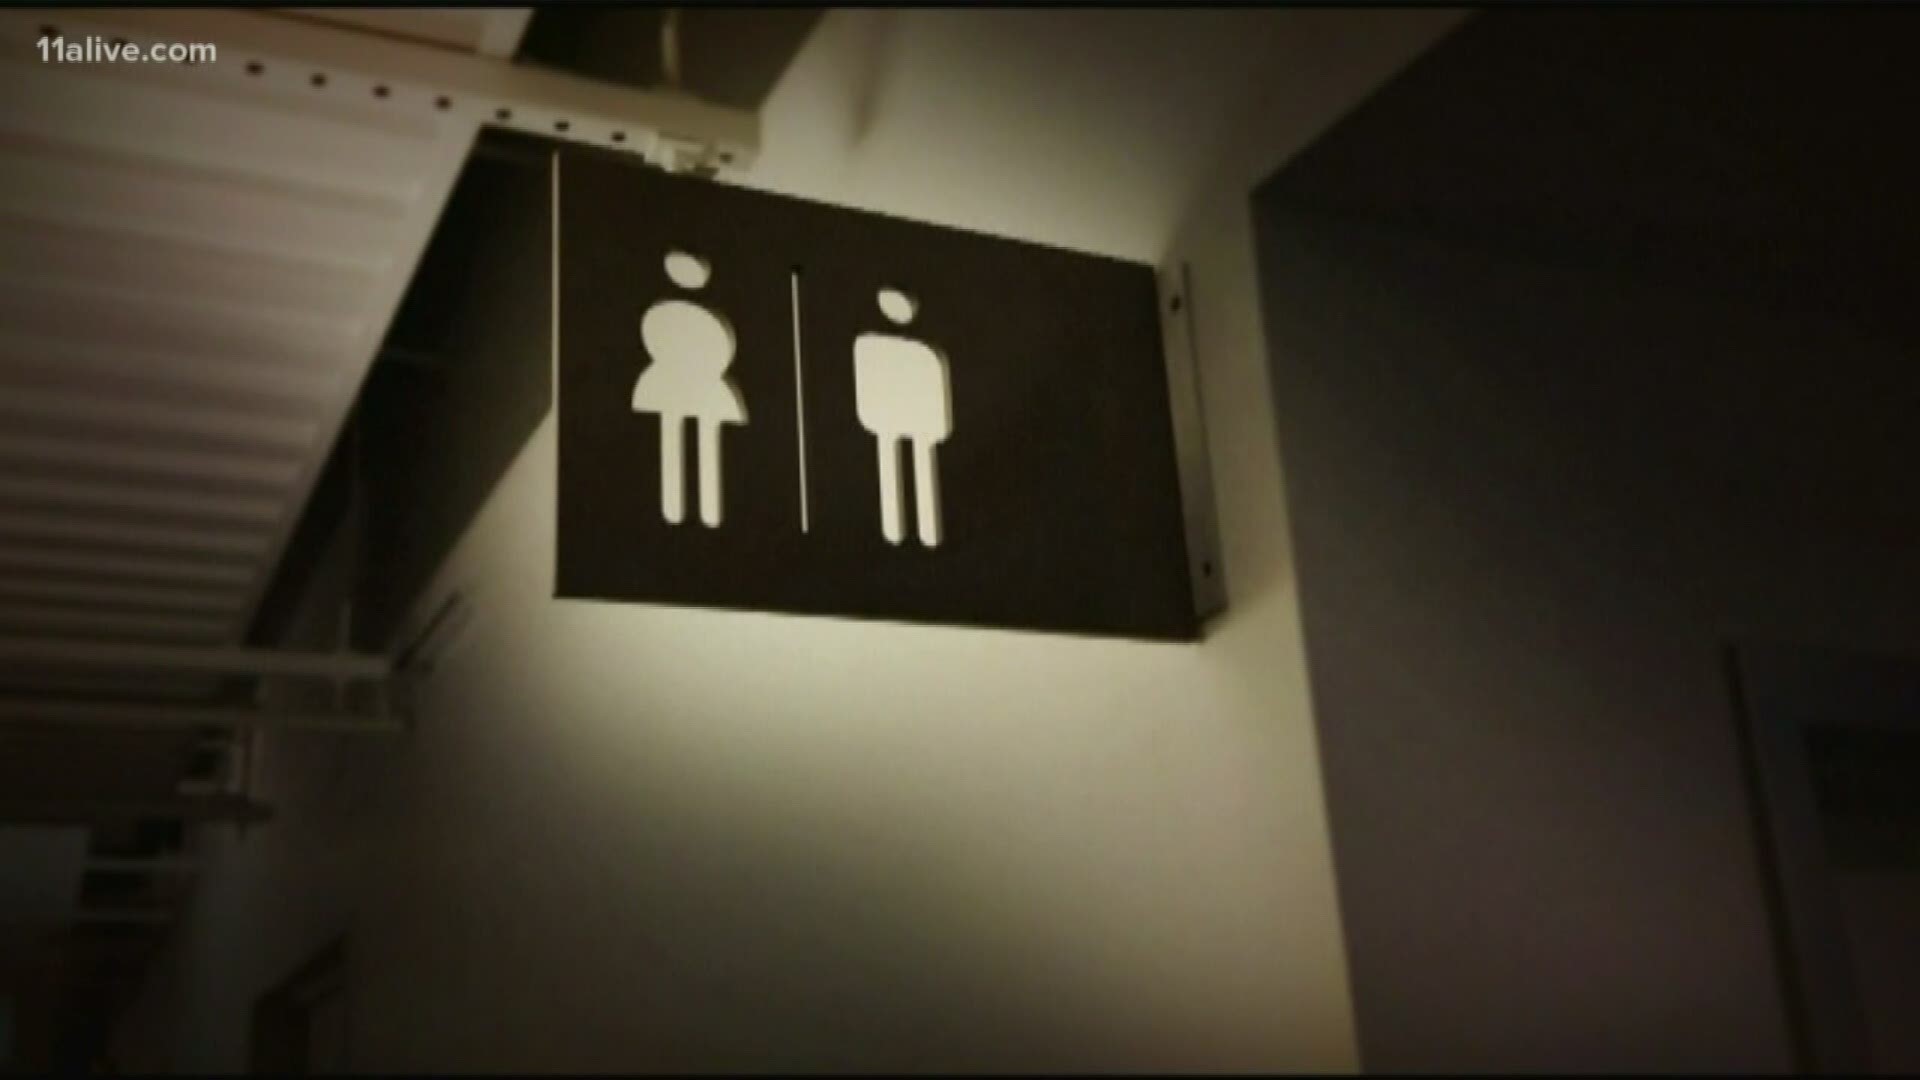 There’s no universally enforced rule regarding bathroom policies in Georgia. The Board of Education allows each school board and district to define their policies.